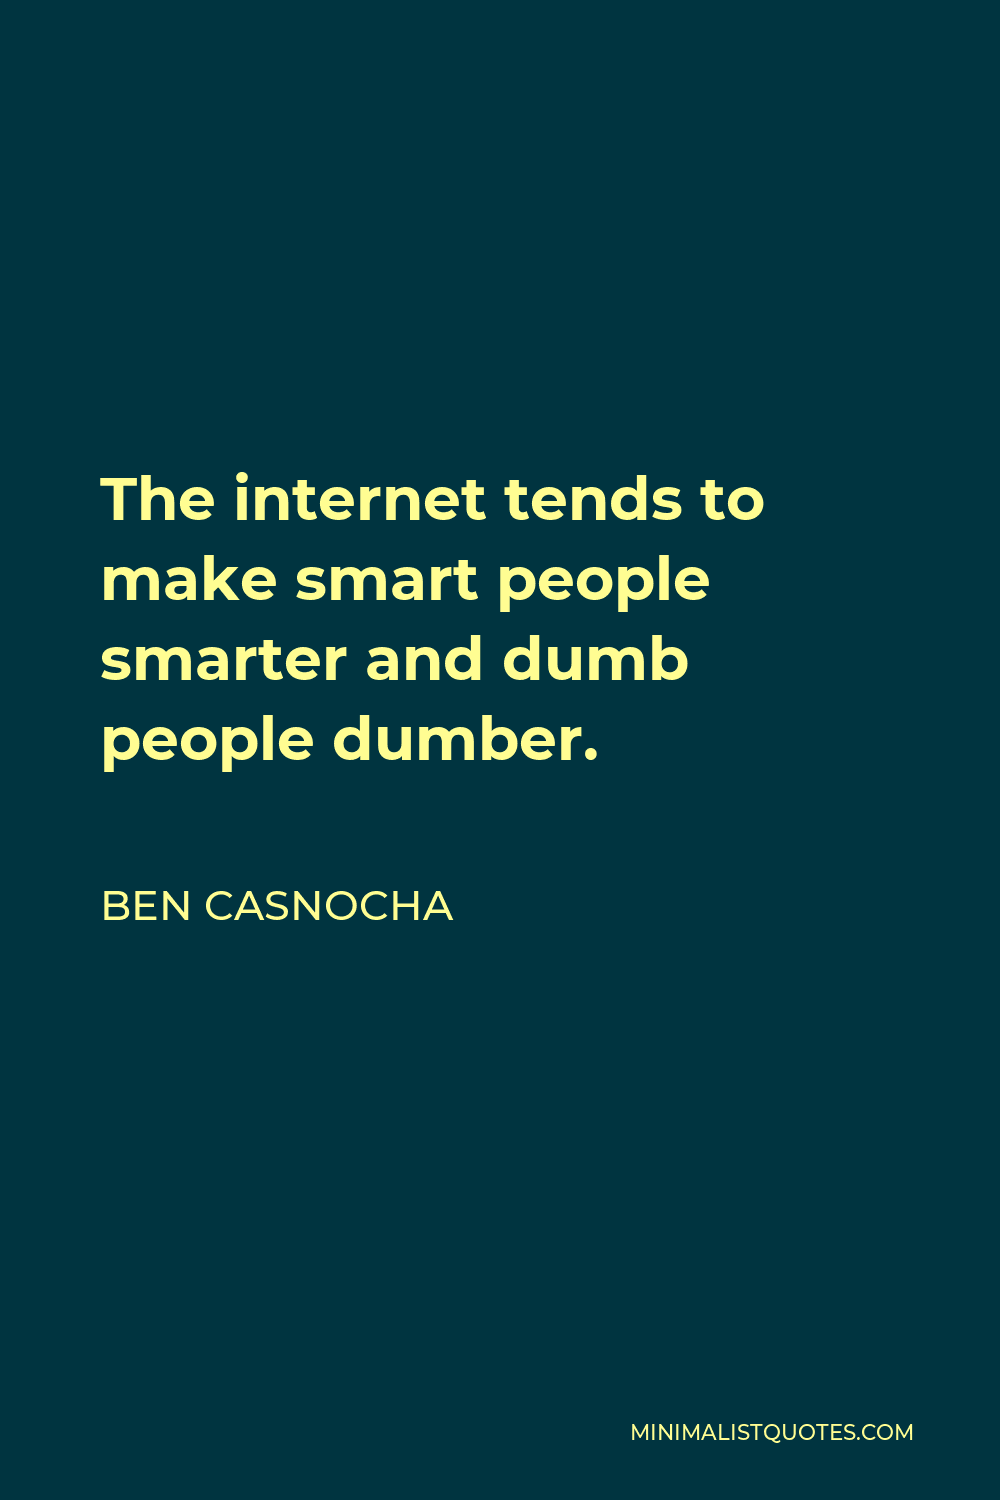 Ben Casnocha Quote - The internet tends to make smart people smarter and dumb people dumber.